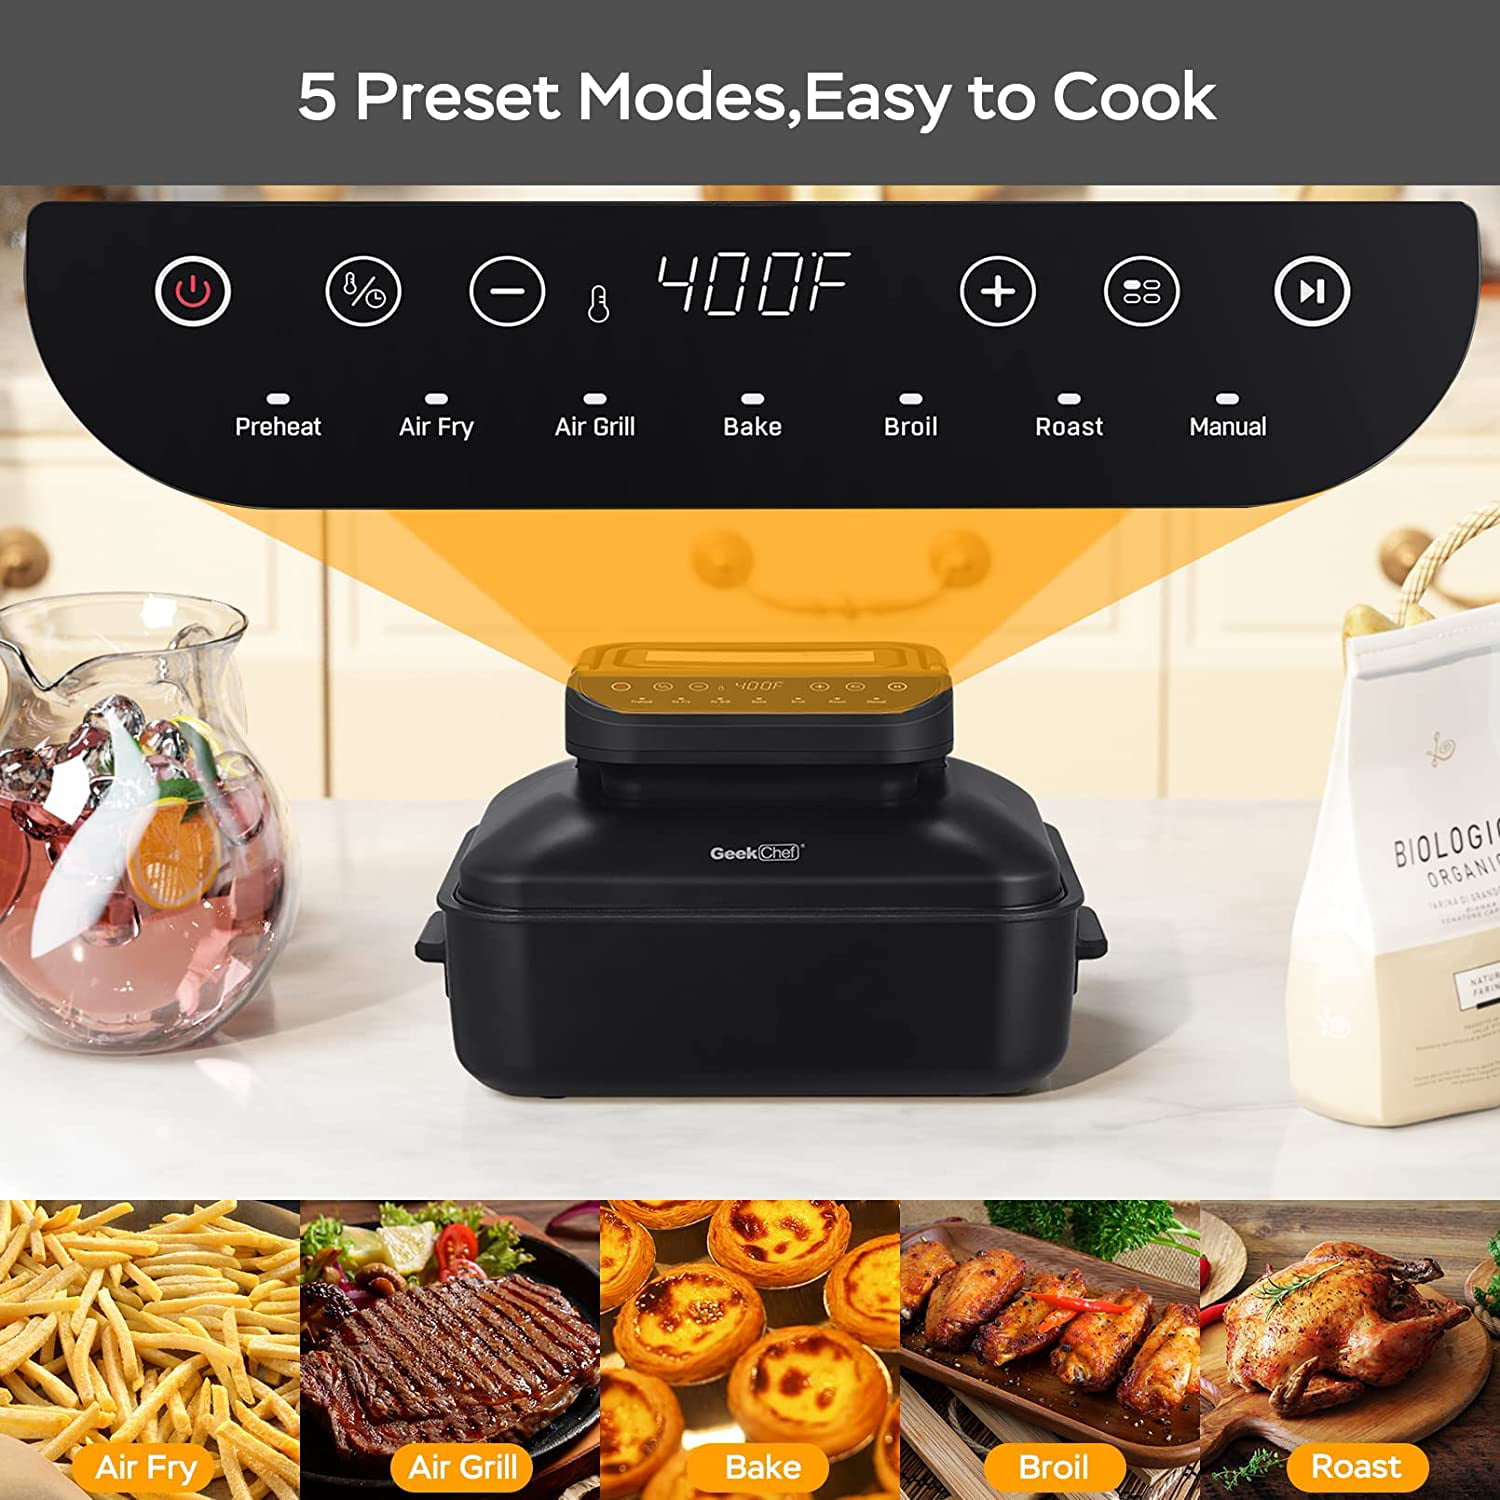 Geek Chef Air Fryer Lid & Electric Indoor Grill Combo, 7-in-1 Air Fryer  Oven, Countertop Grill & Griddle, whit Grill, Broil, Roast, Bake, Crisp